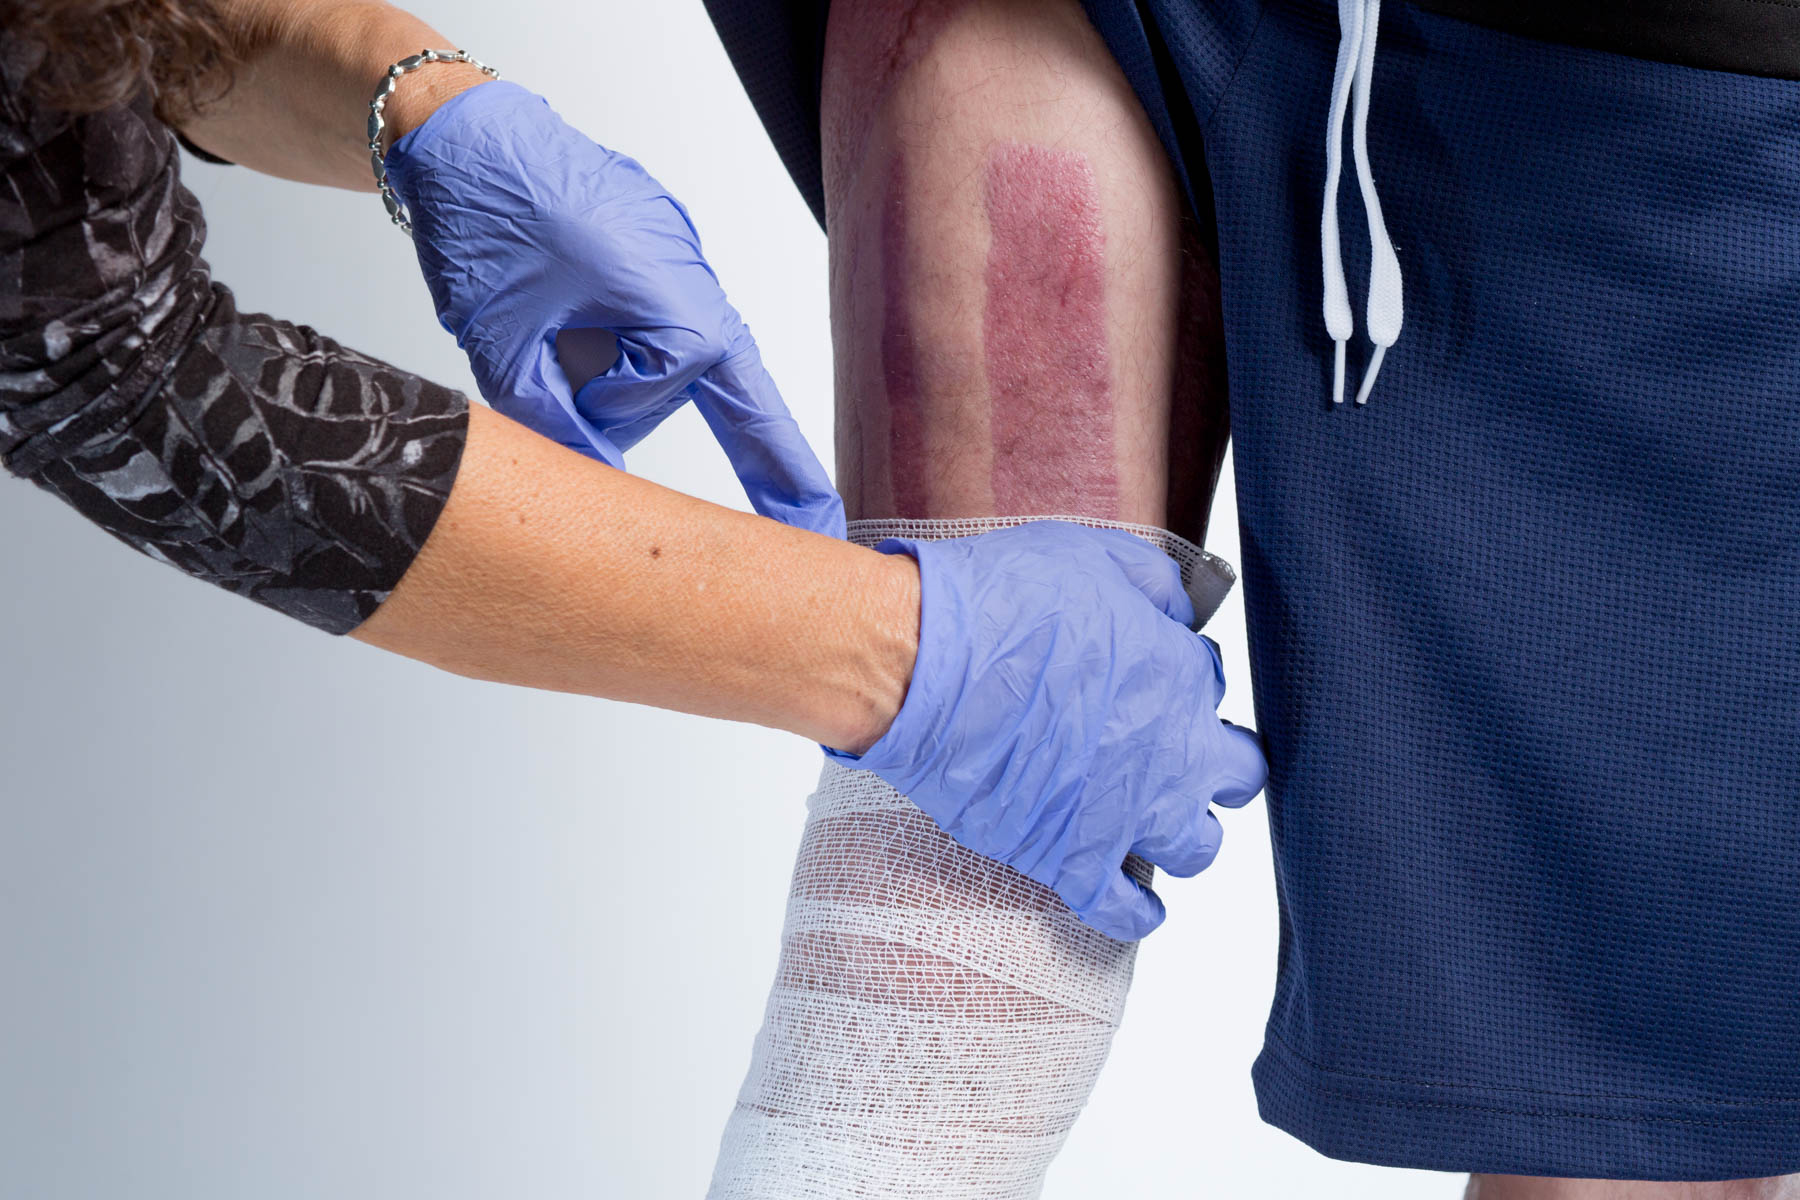 To stay ahead of the flesh-eating bacteria, a team of six wound care physical therapists dressed patient Alfred Lopez’s wounds every day, which sometimes took up to two hours to complete.